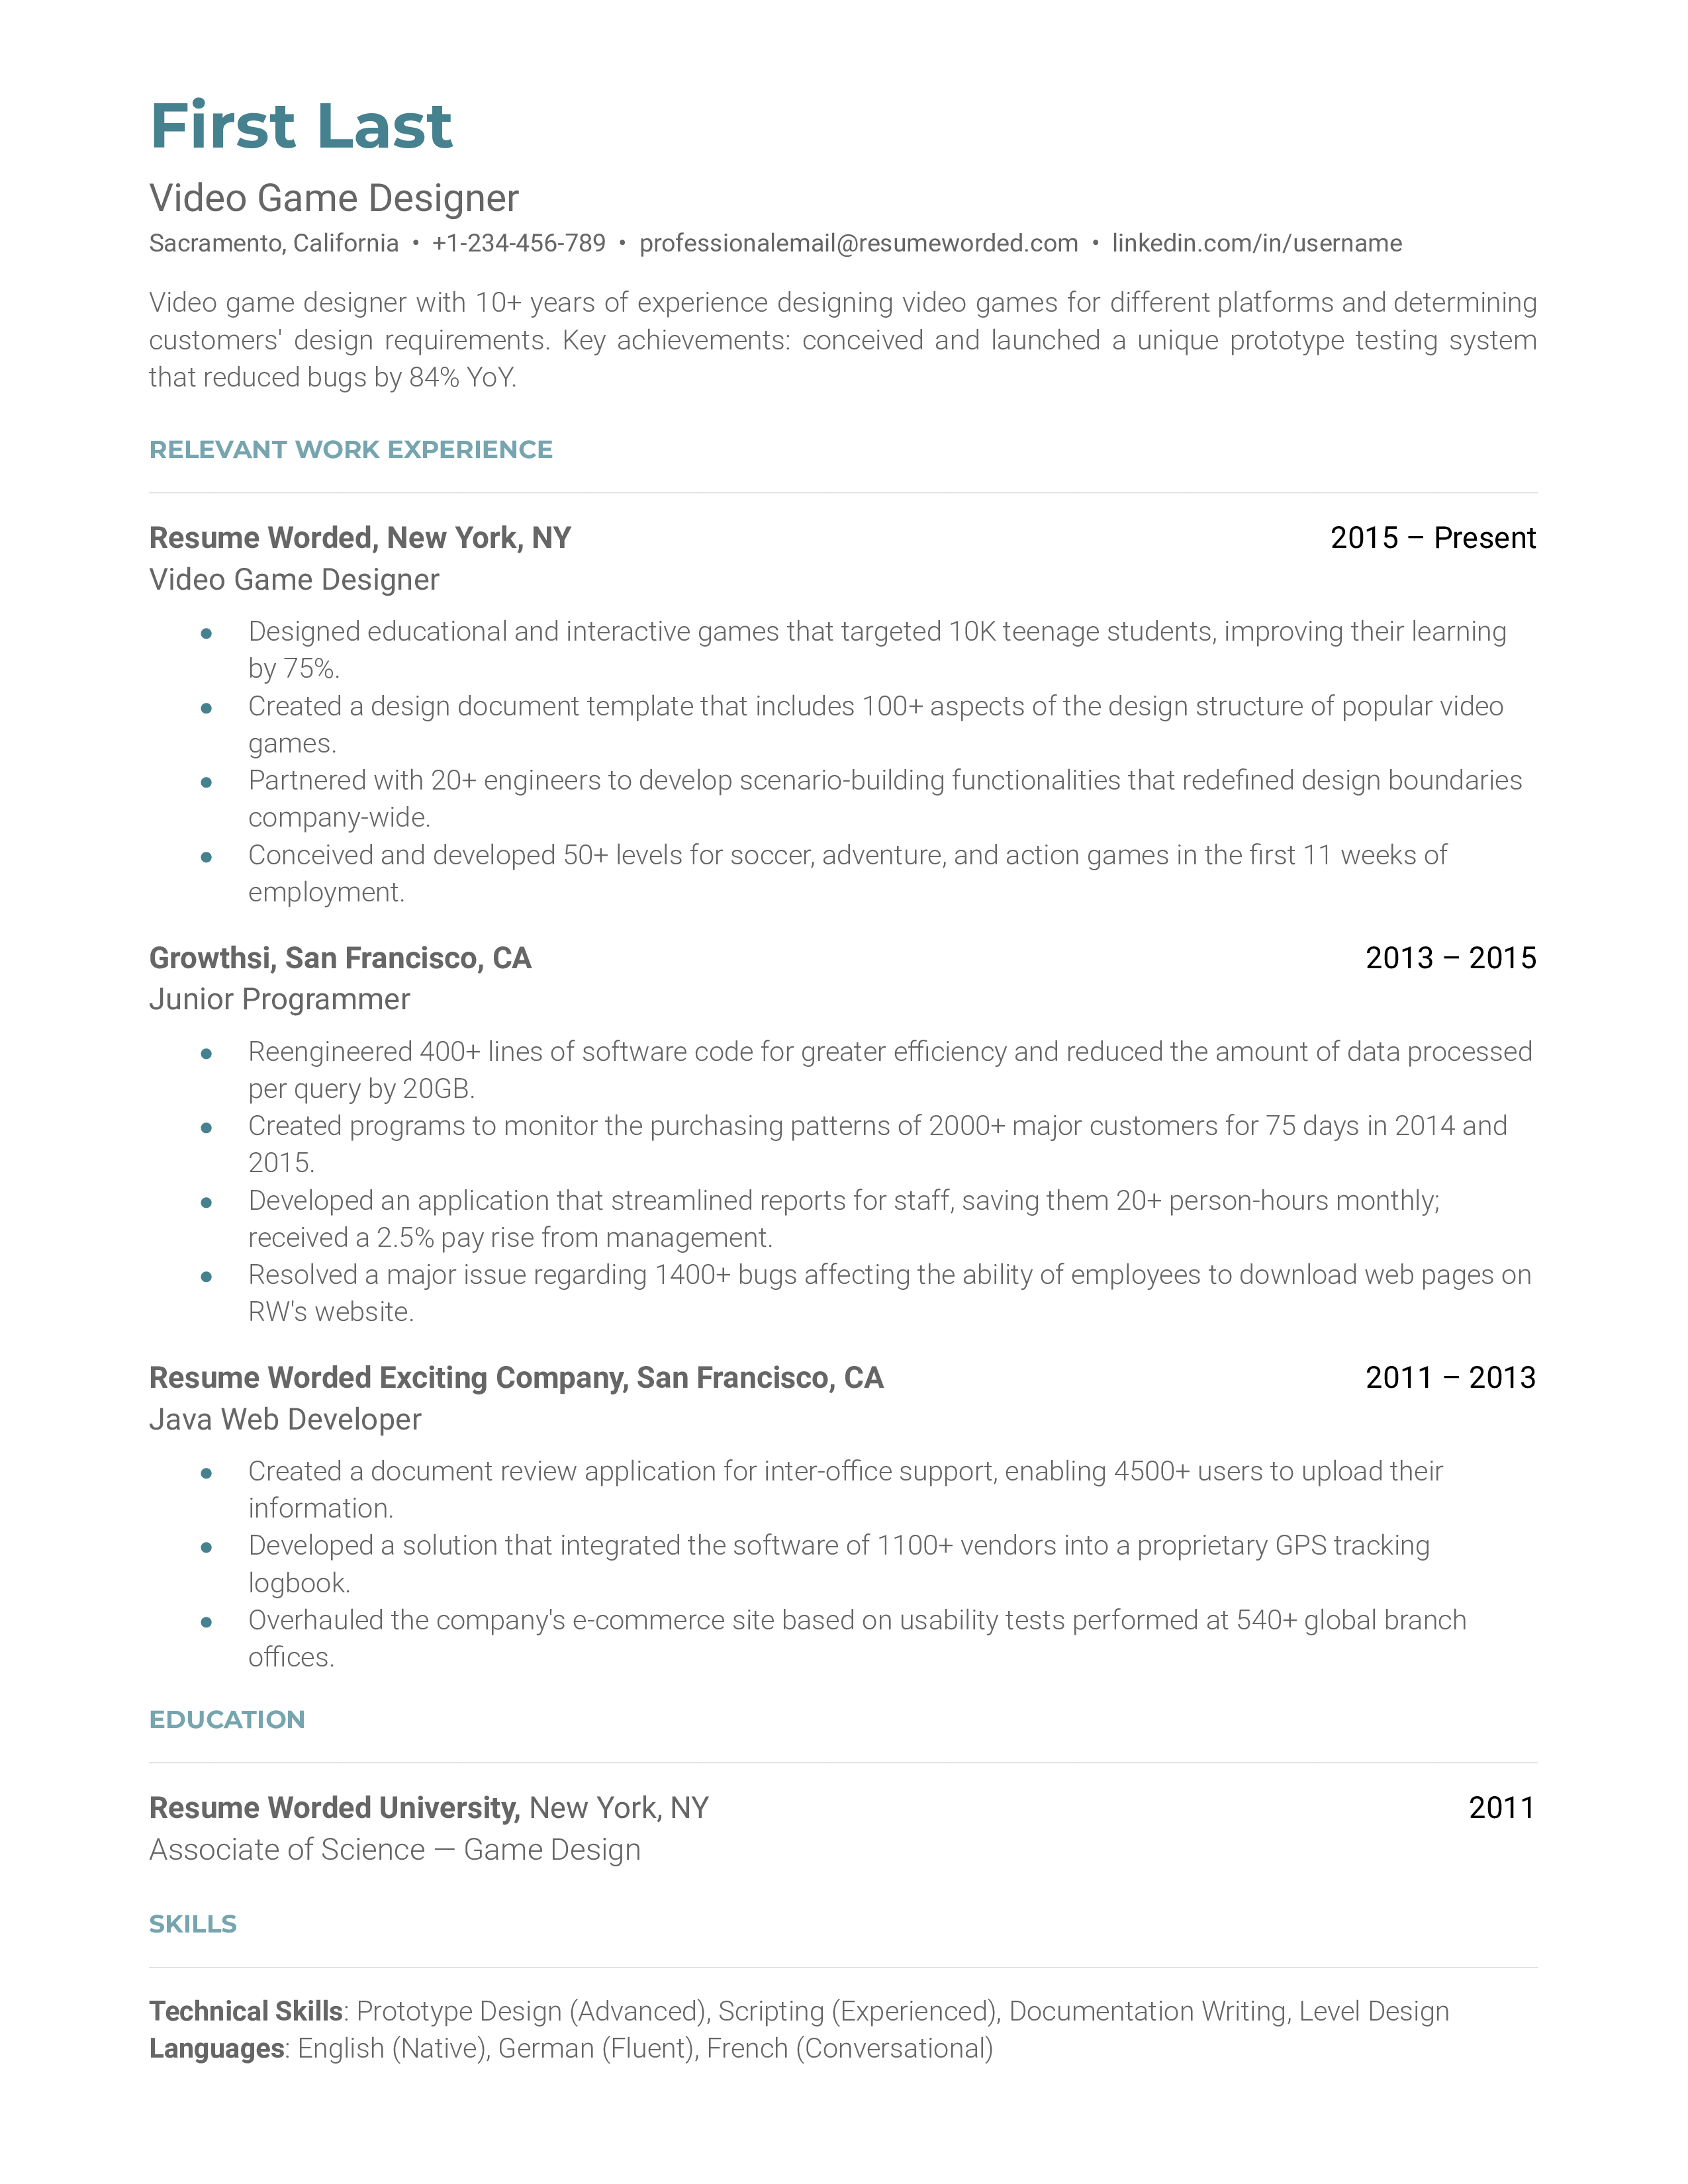 Video game designer resume example showcasing creative projects and technical skills.